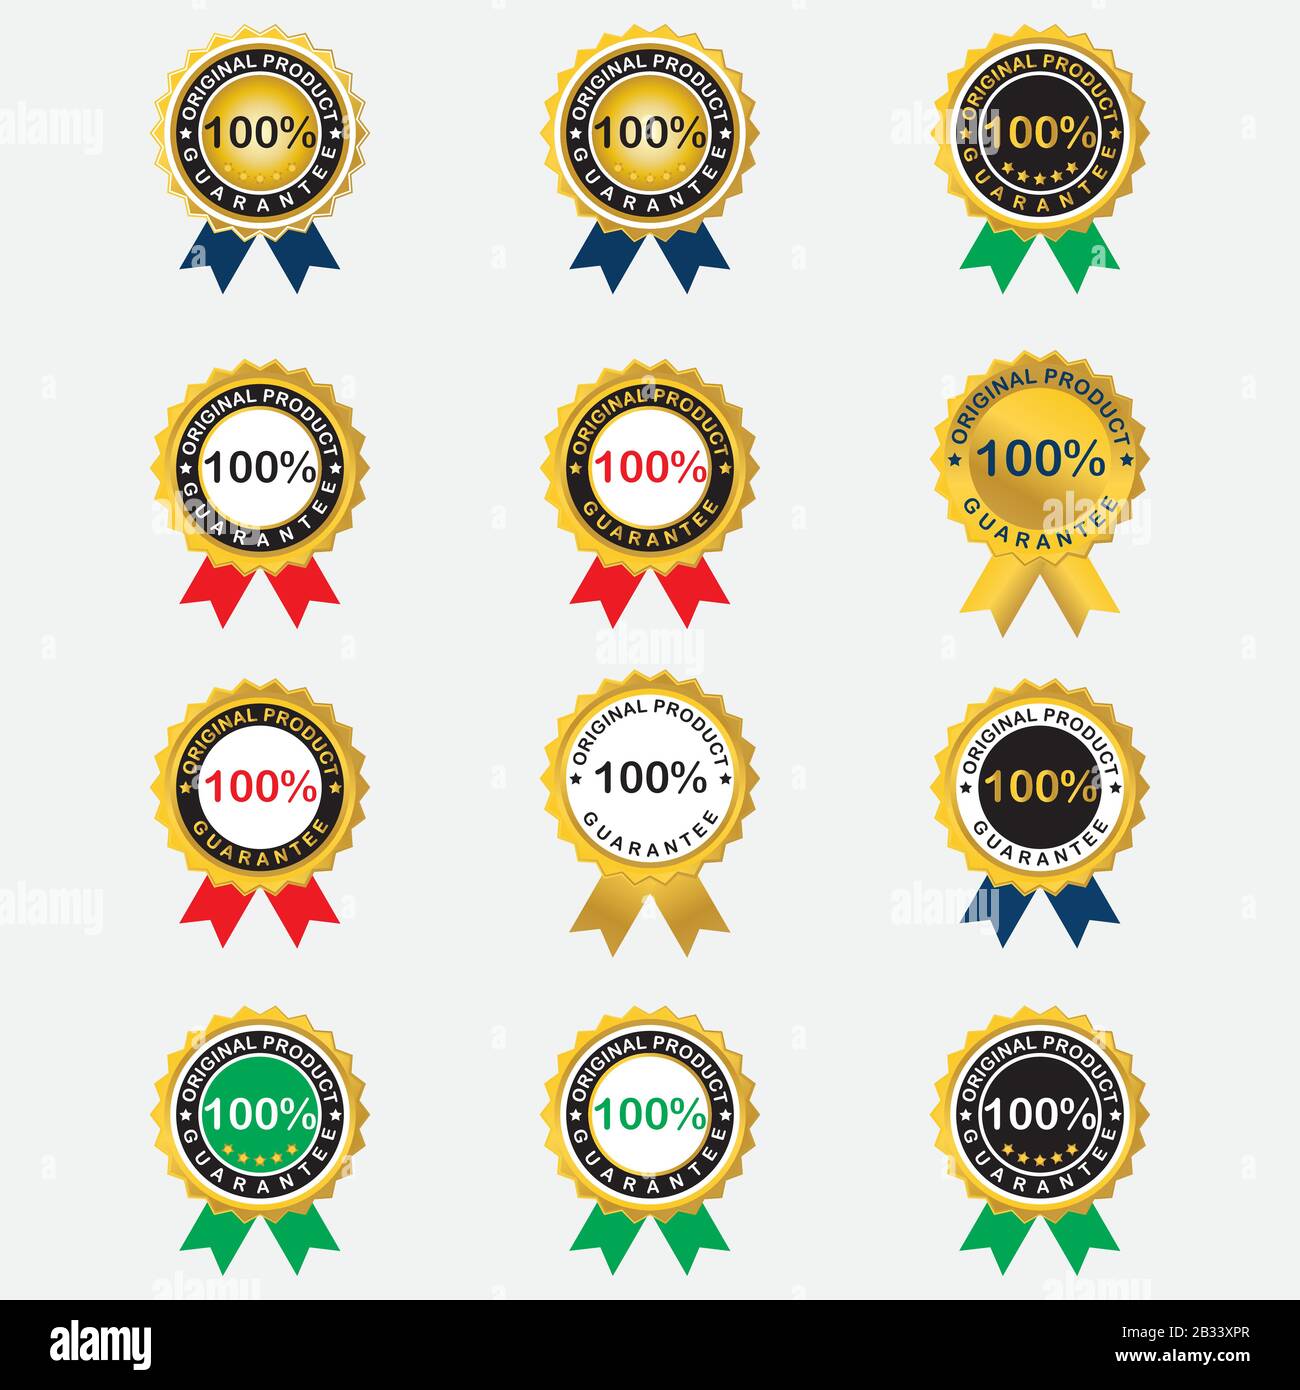 Free Vector  Realistic golden luxury badges collection